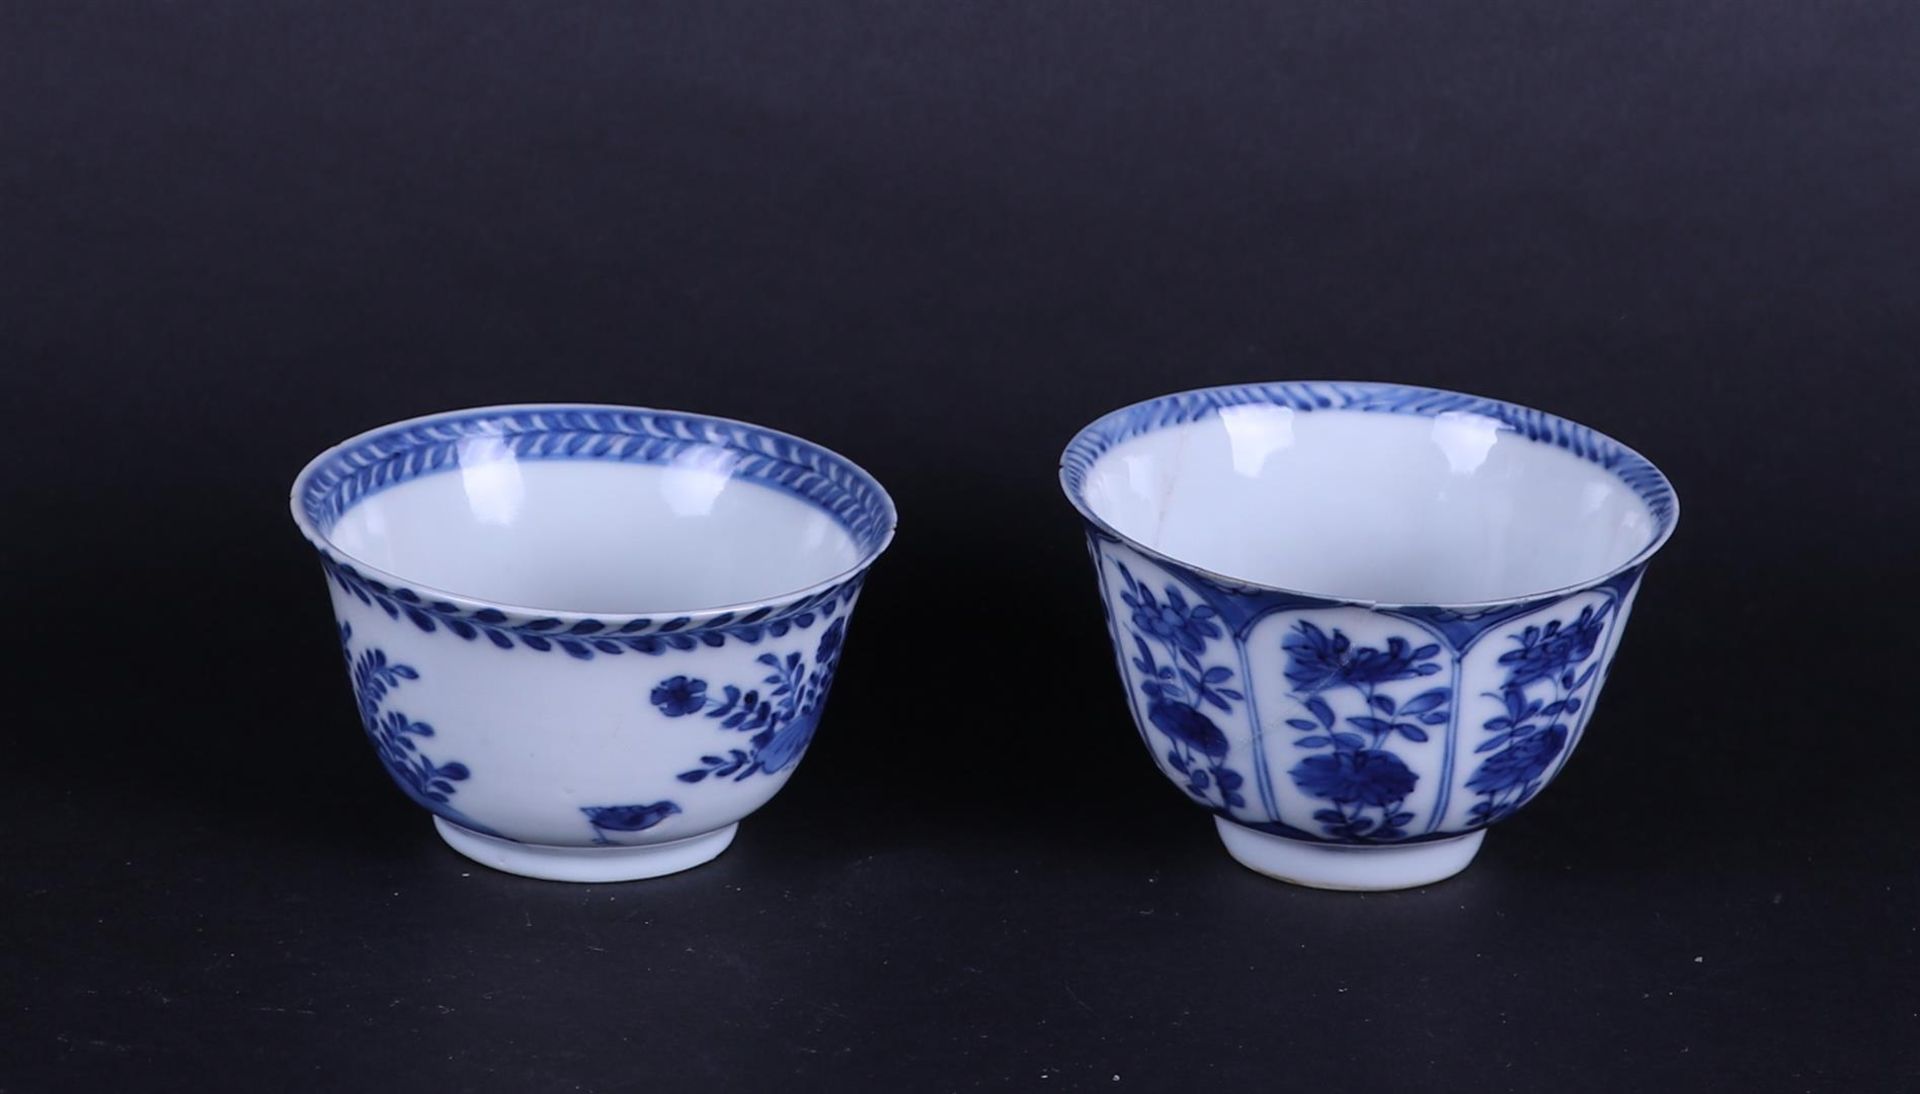 Two different porcelain bowls, one with a pavilion decor, the other with flower beds. China, 